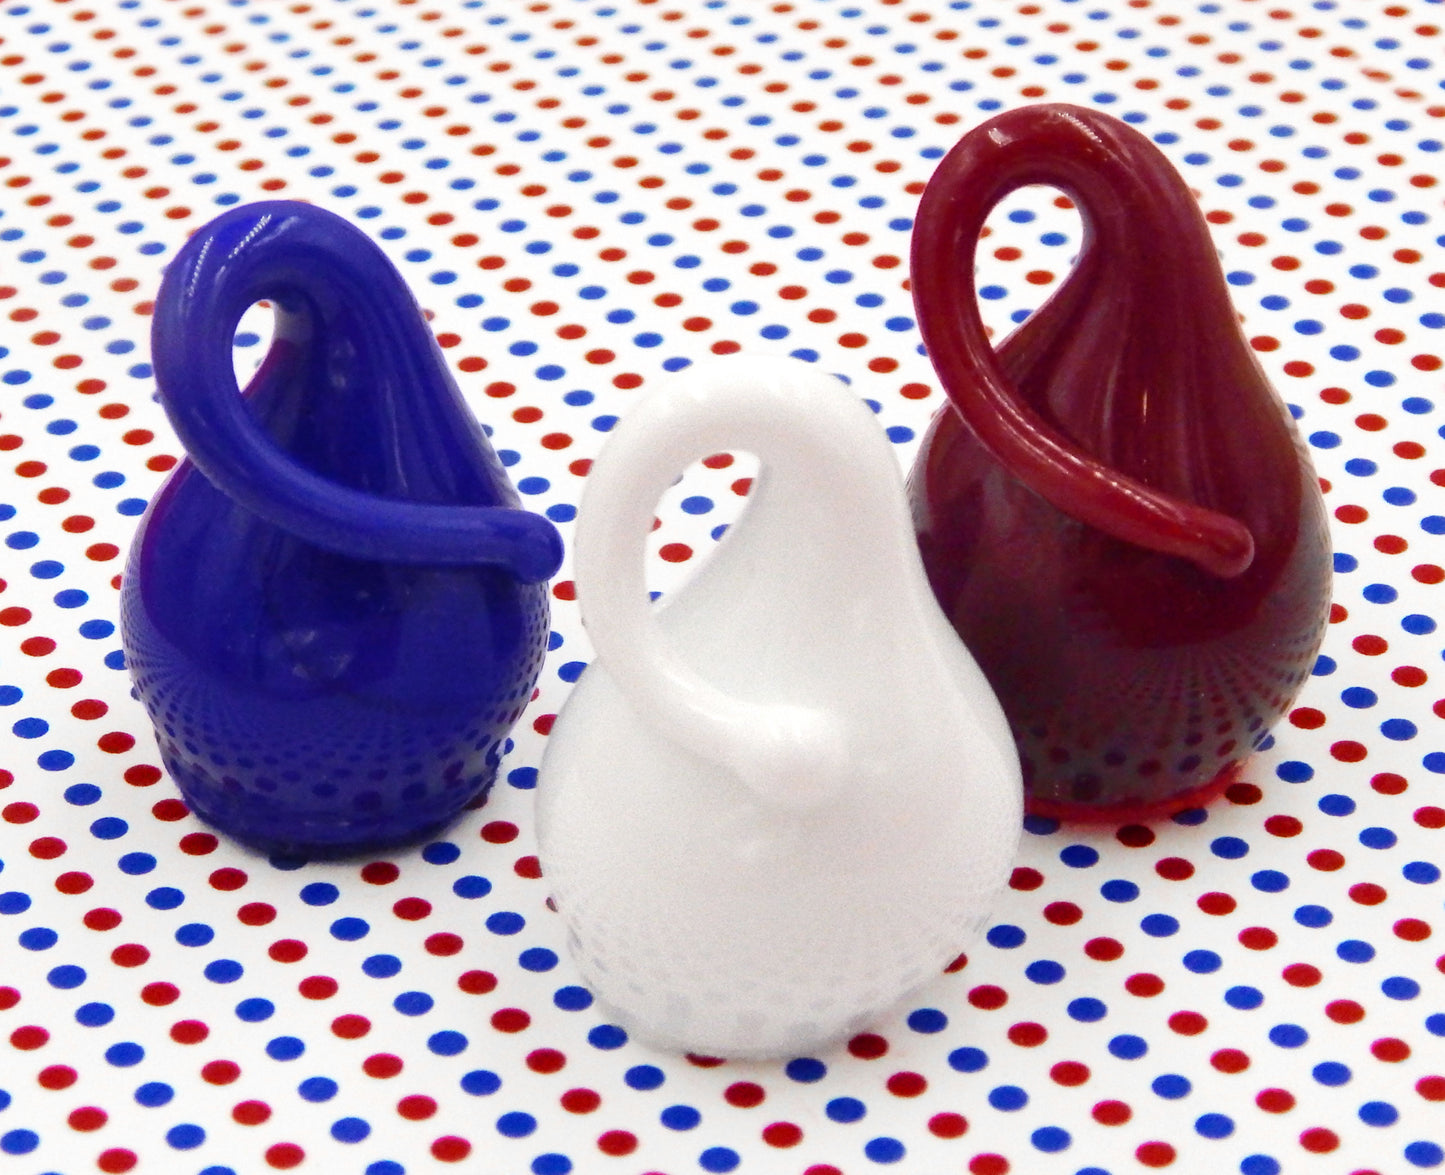 Patriotic Chocolate Drop, Red, White & Blue Colors (CD2+)